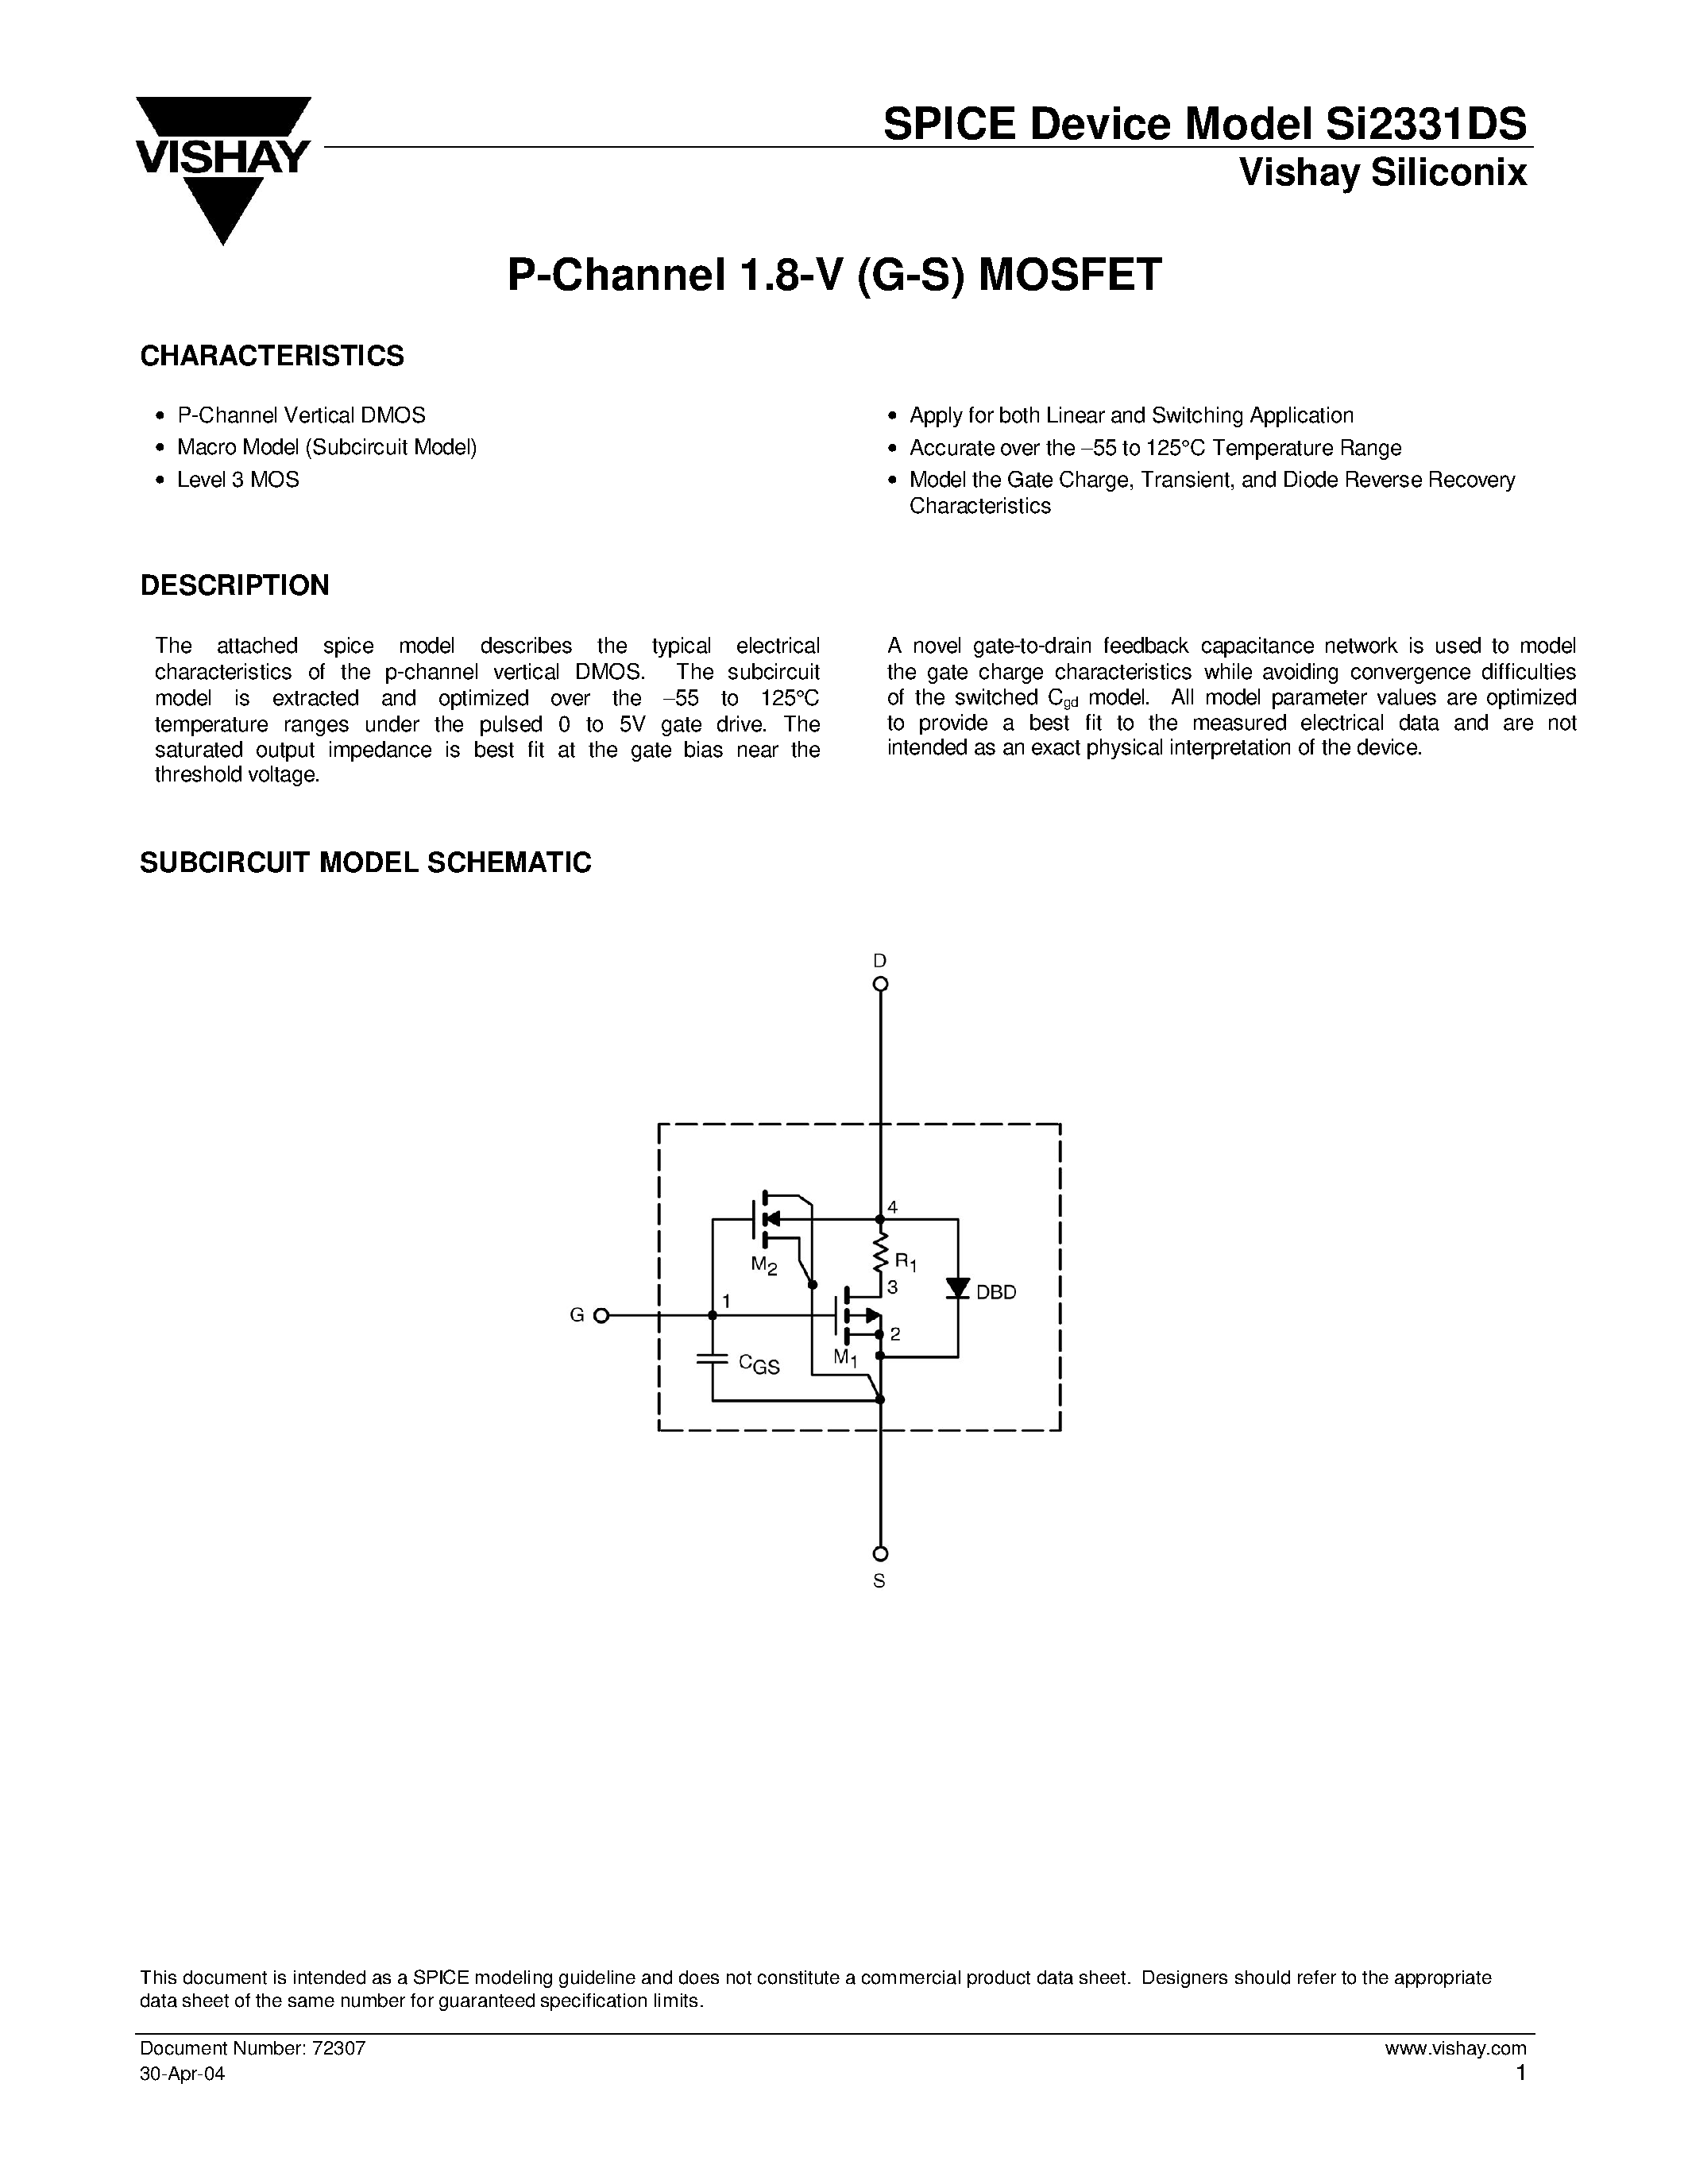 Даташит SI2331DS - P-Channel 1.8-V (G-S) MOSFET страница 1